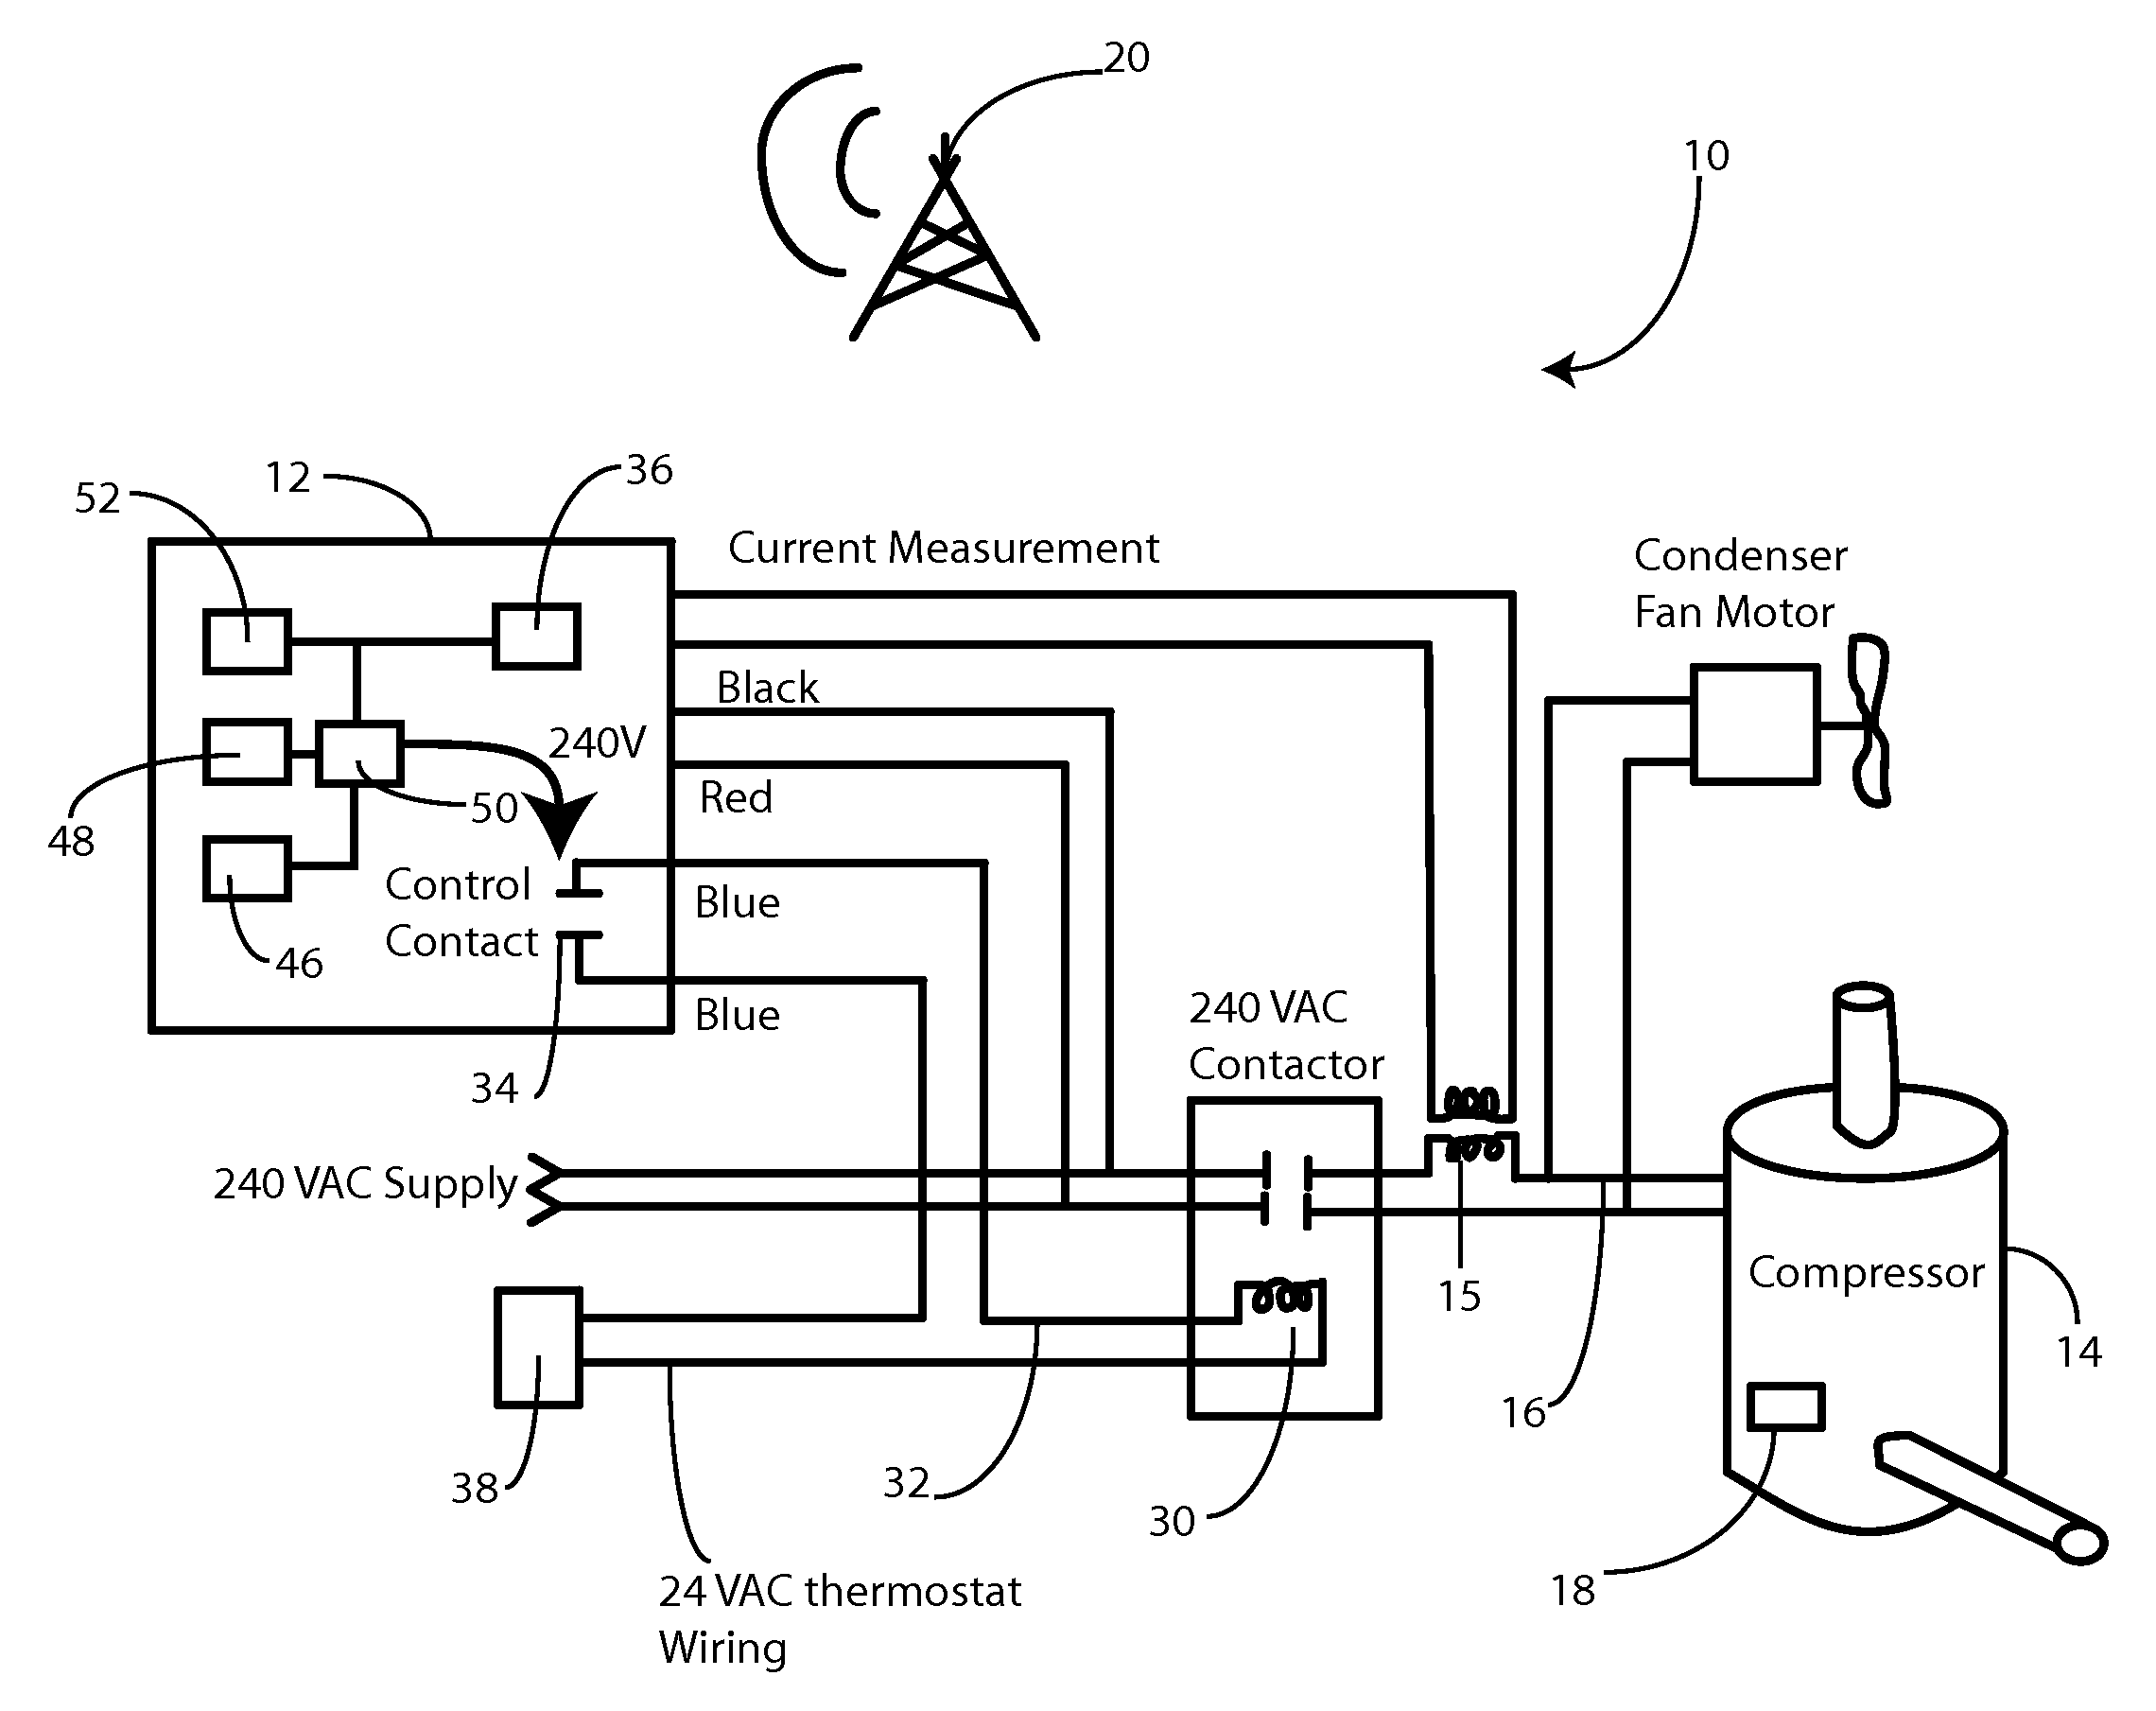 Local Power Consumption Load Control